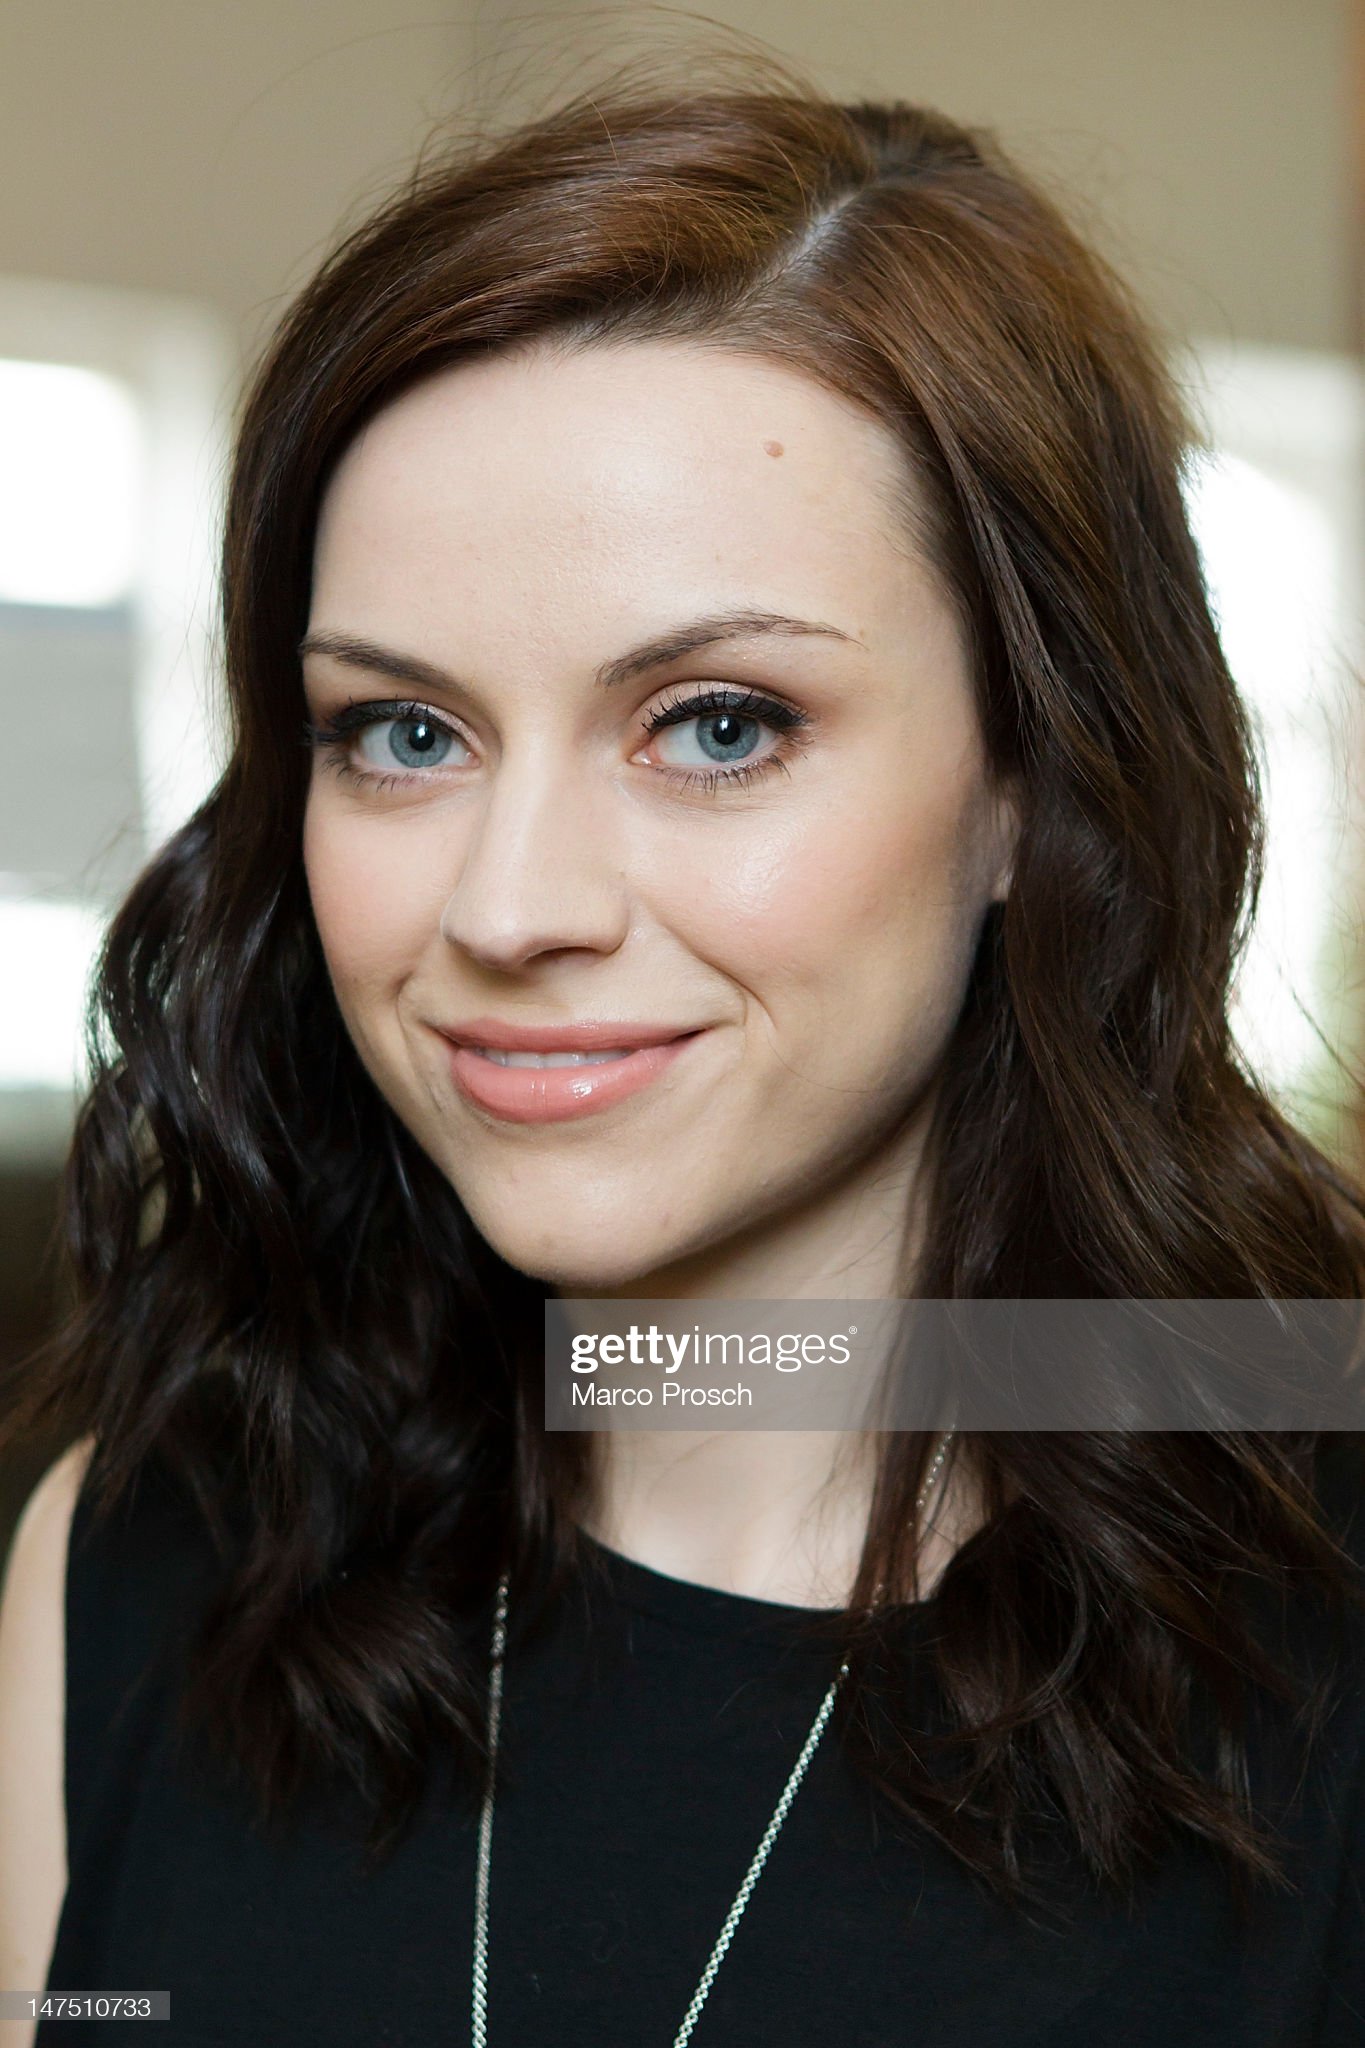 Scottish singer Amy Macdonald is pictured prior to her concert at the Reiche Zeche on July 01, 2012 in Freiberg, Germany.